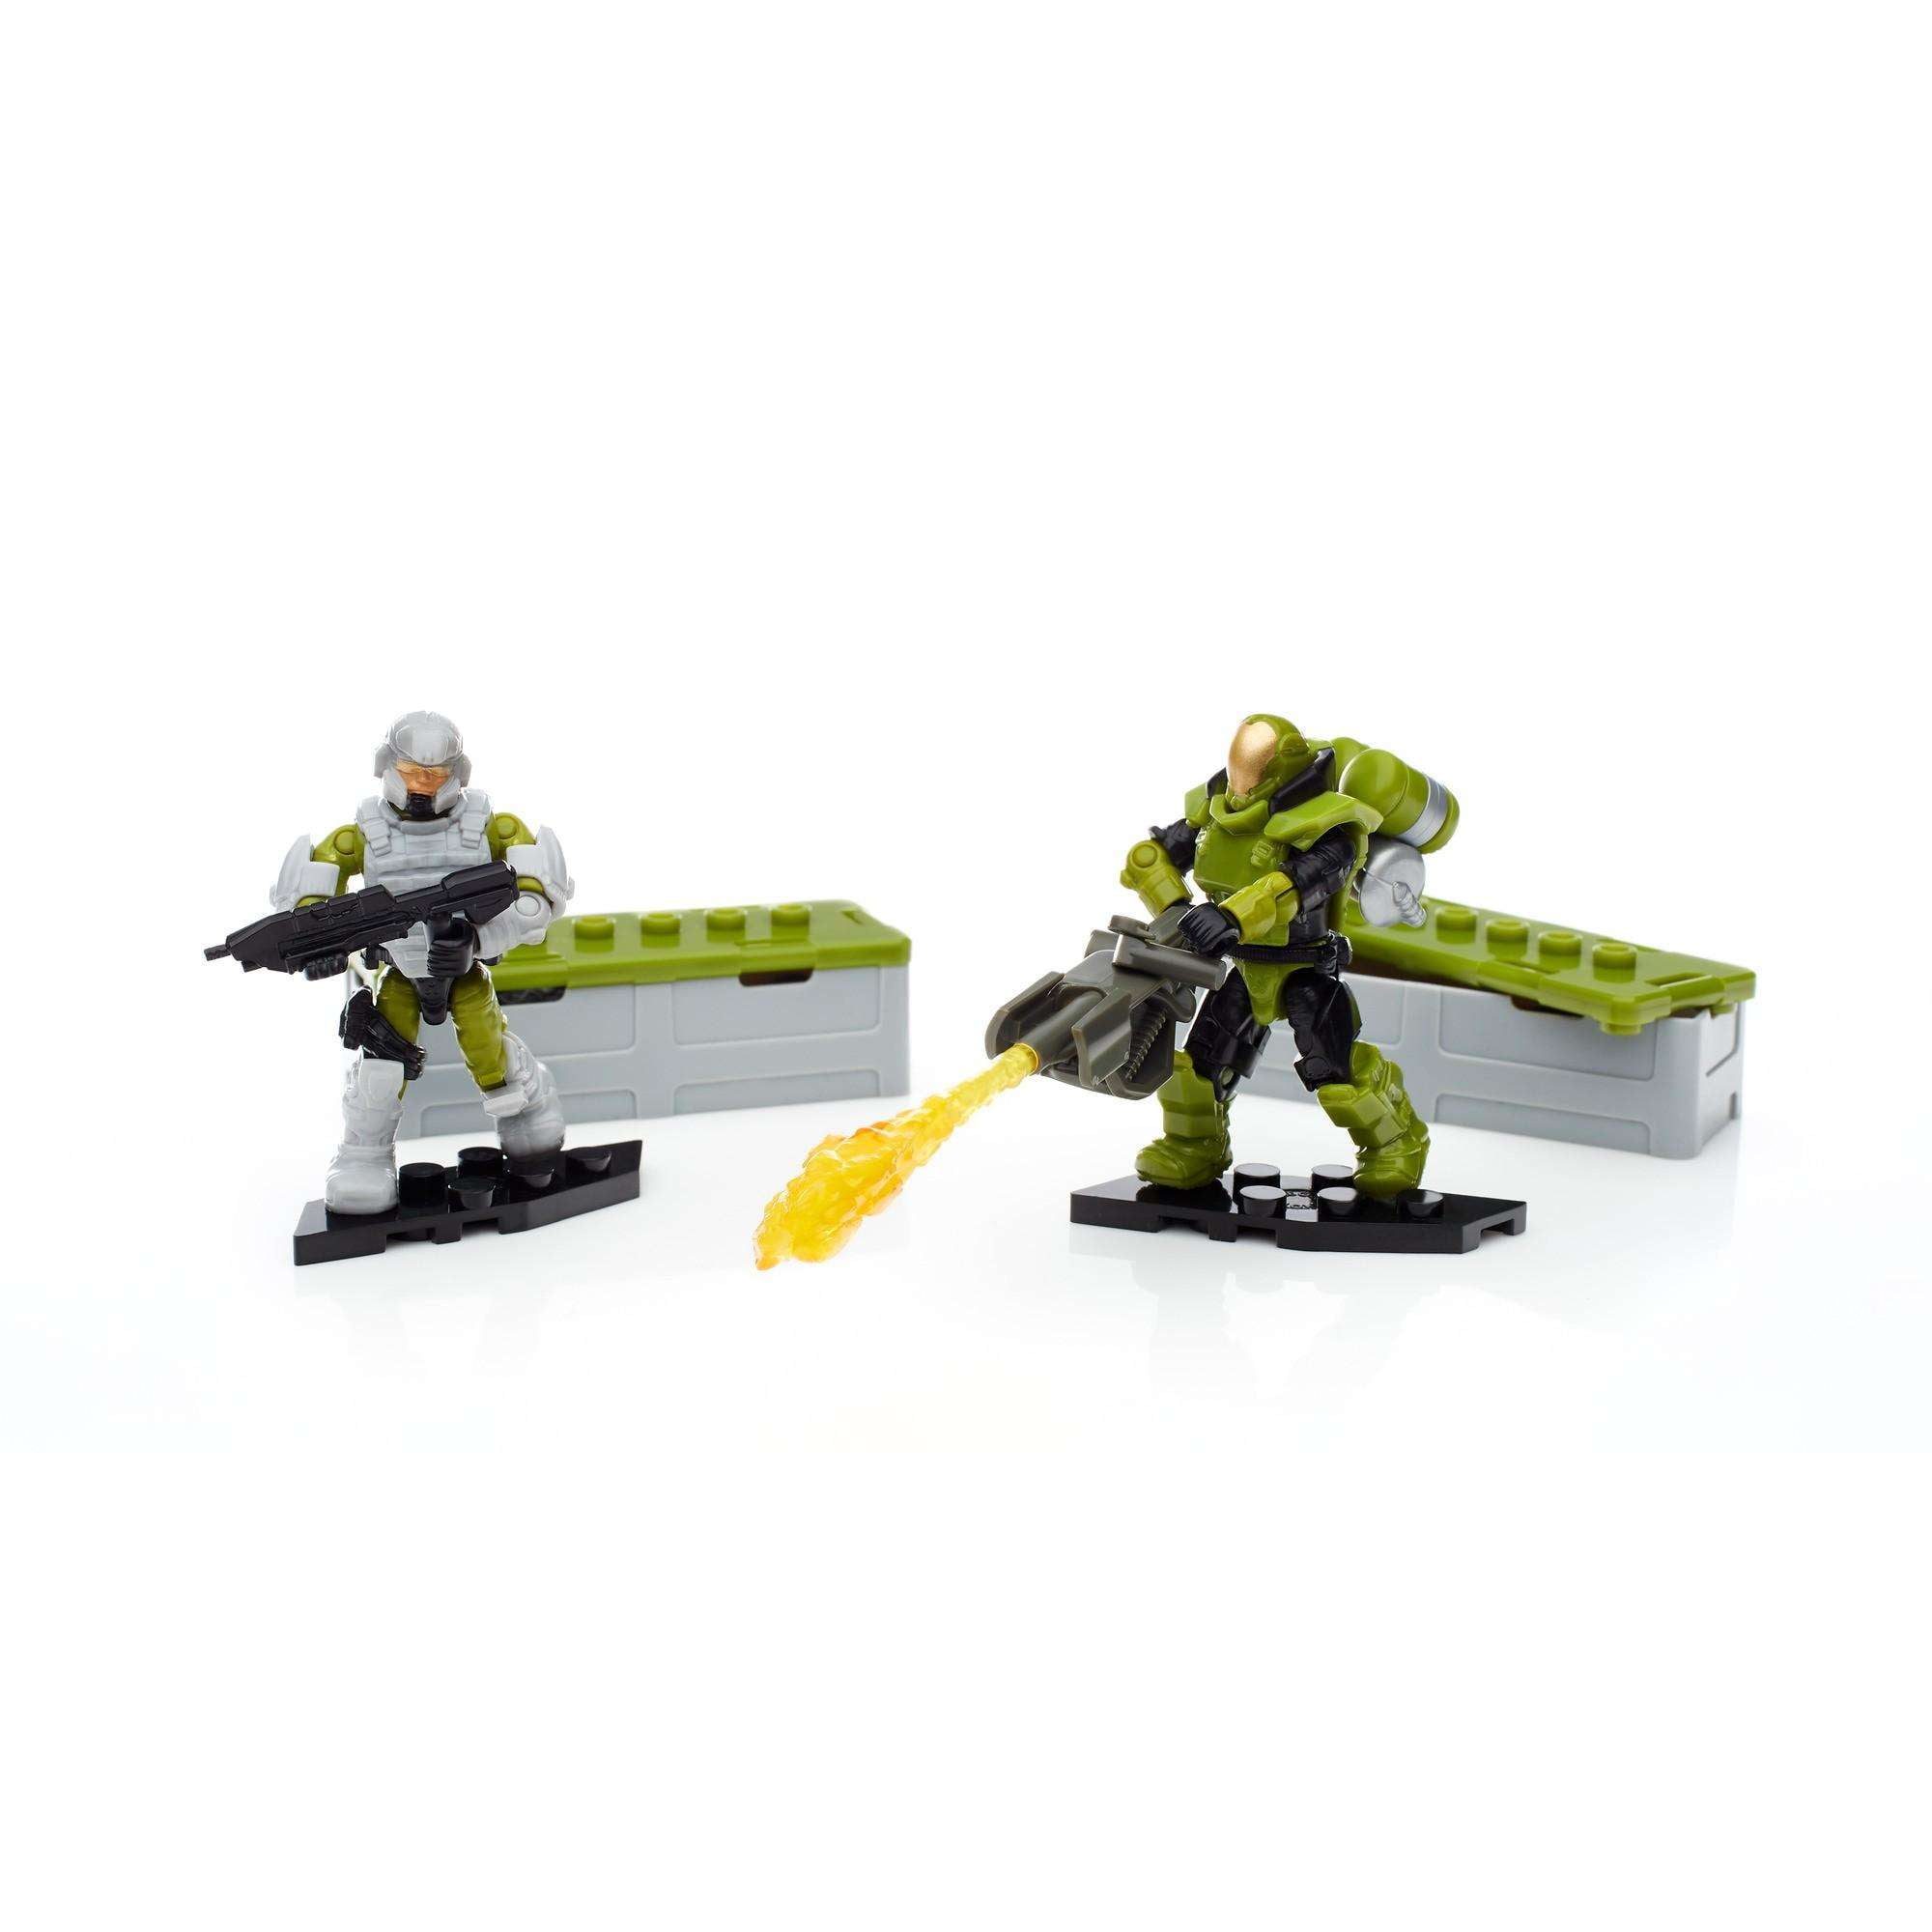 Halo Marines Customizer Pack And A Warrior Blind Pack Series FDY41 